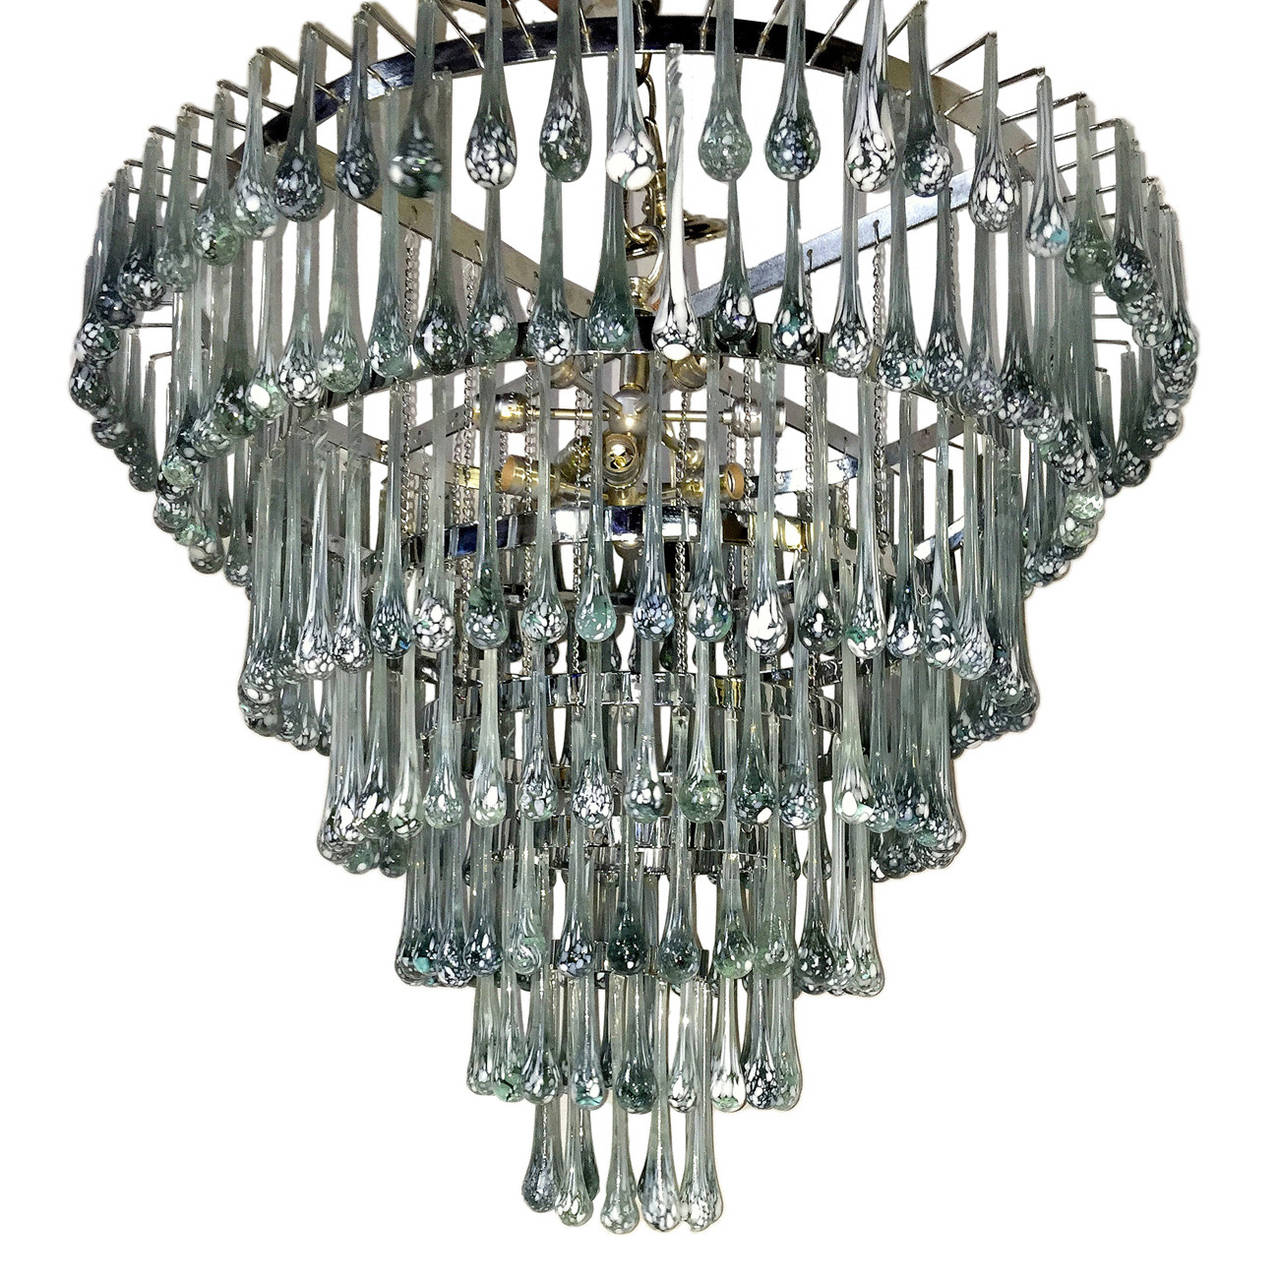 An Italian tiered light fixture with 12 interior lights, circa 1960. Nickel-plated body with aqua and white glass drops.